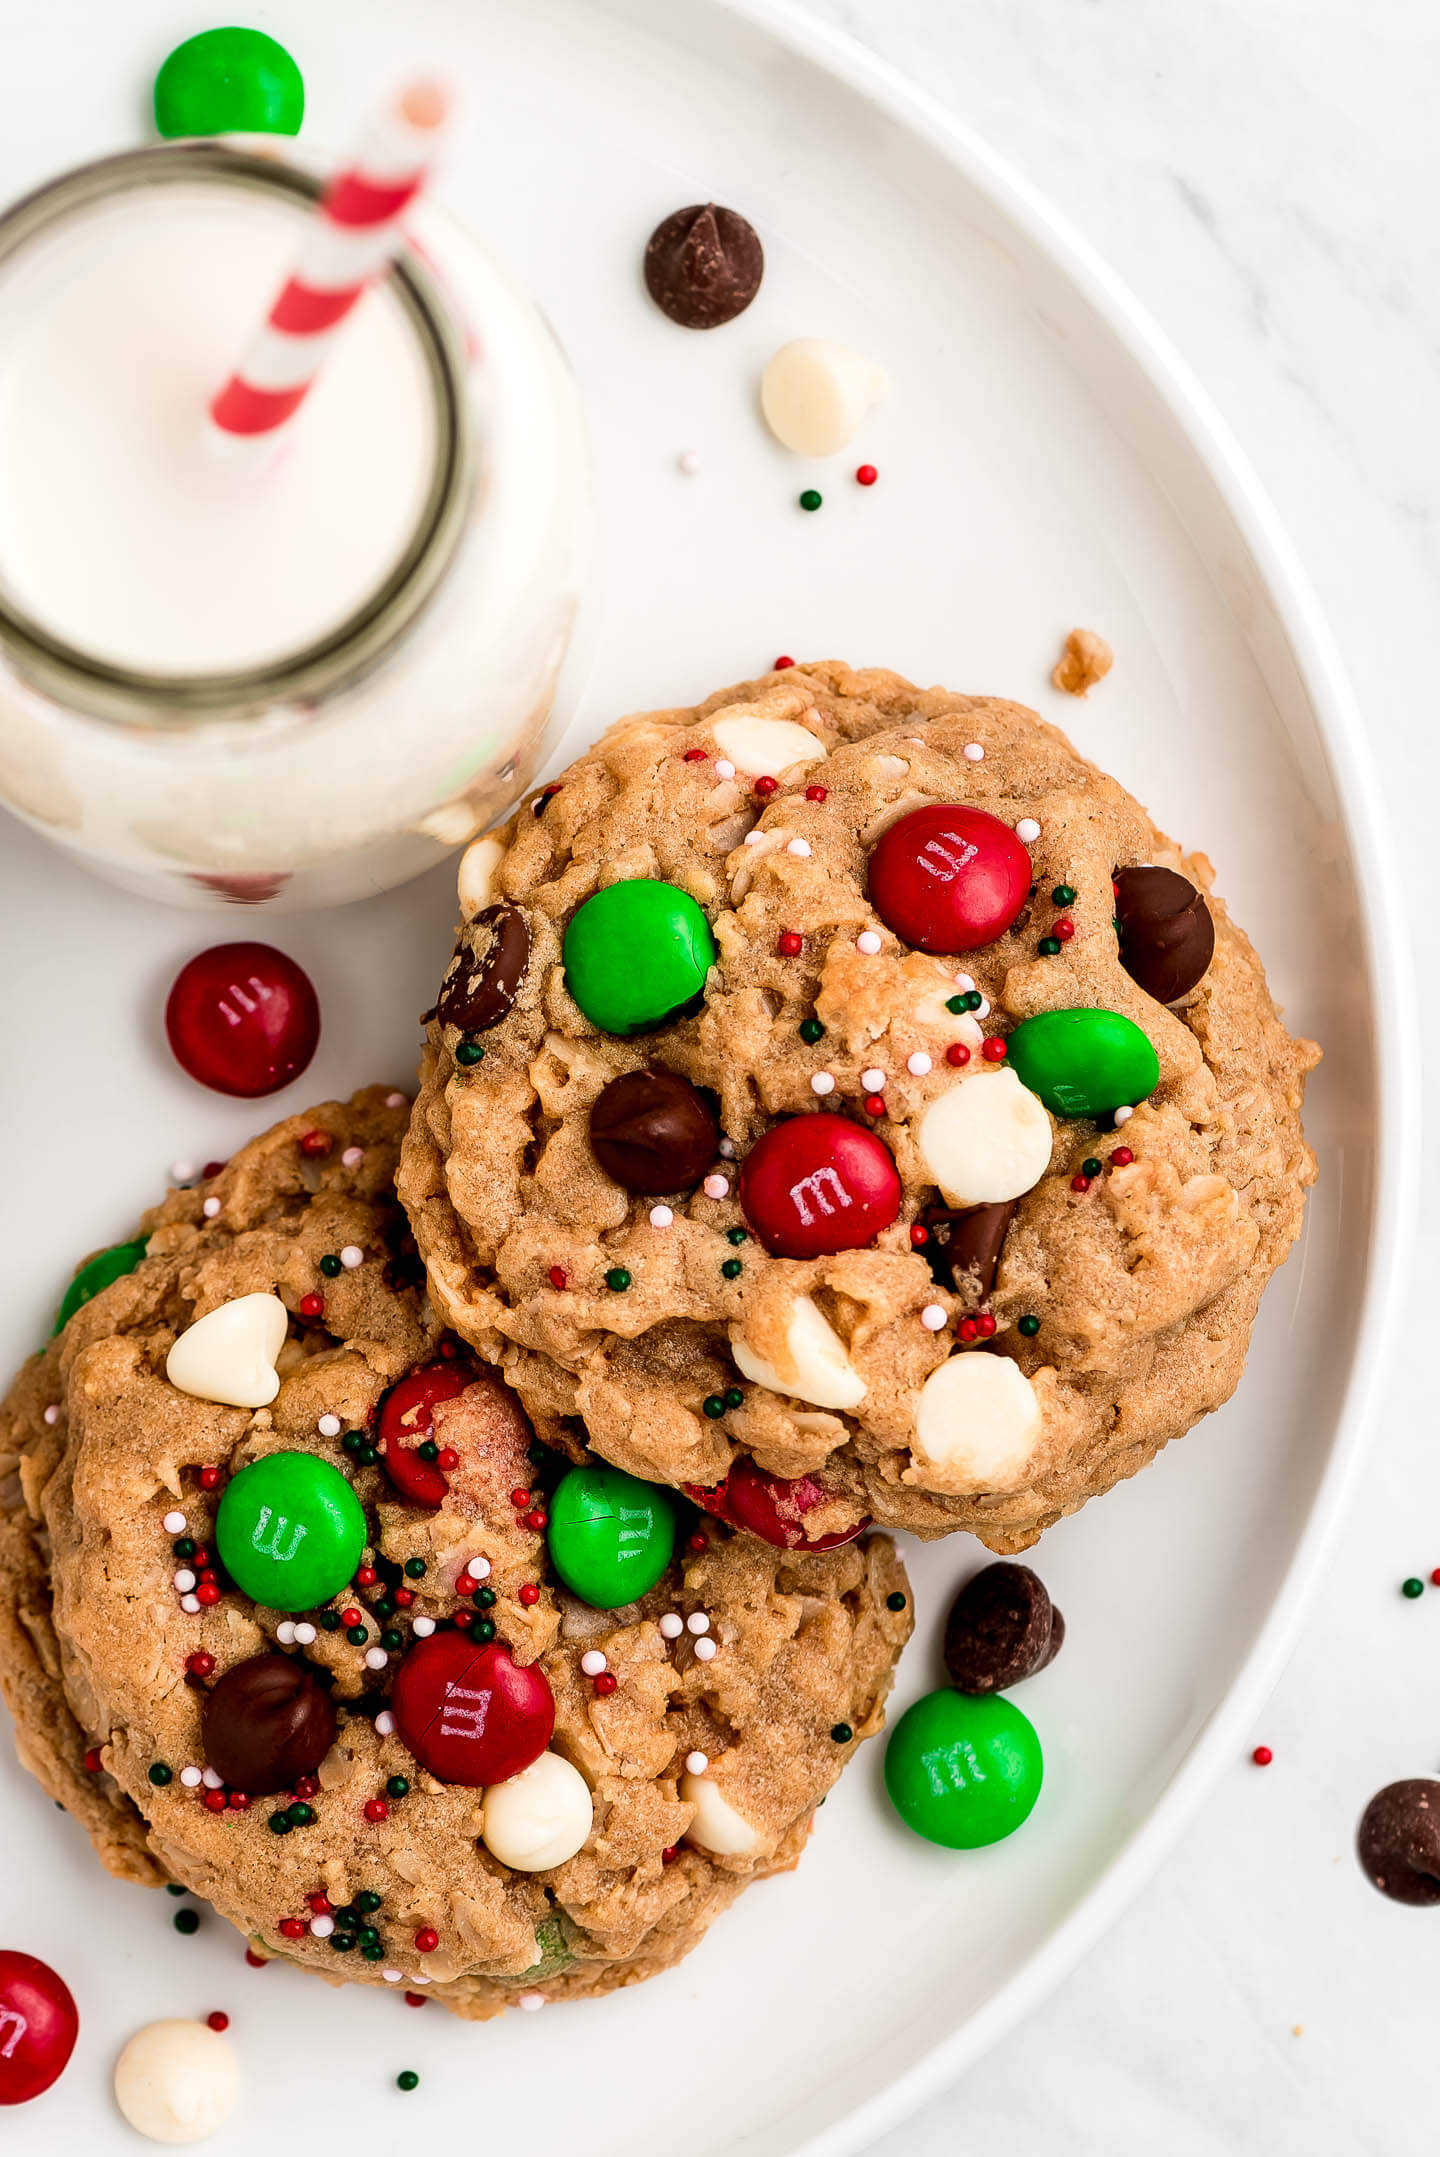 Cookies for Santa studded with M&M's and chocolate chips on a plate and a jar of milk.